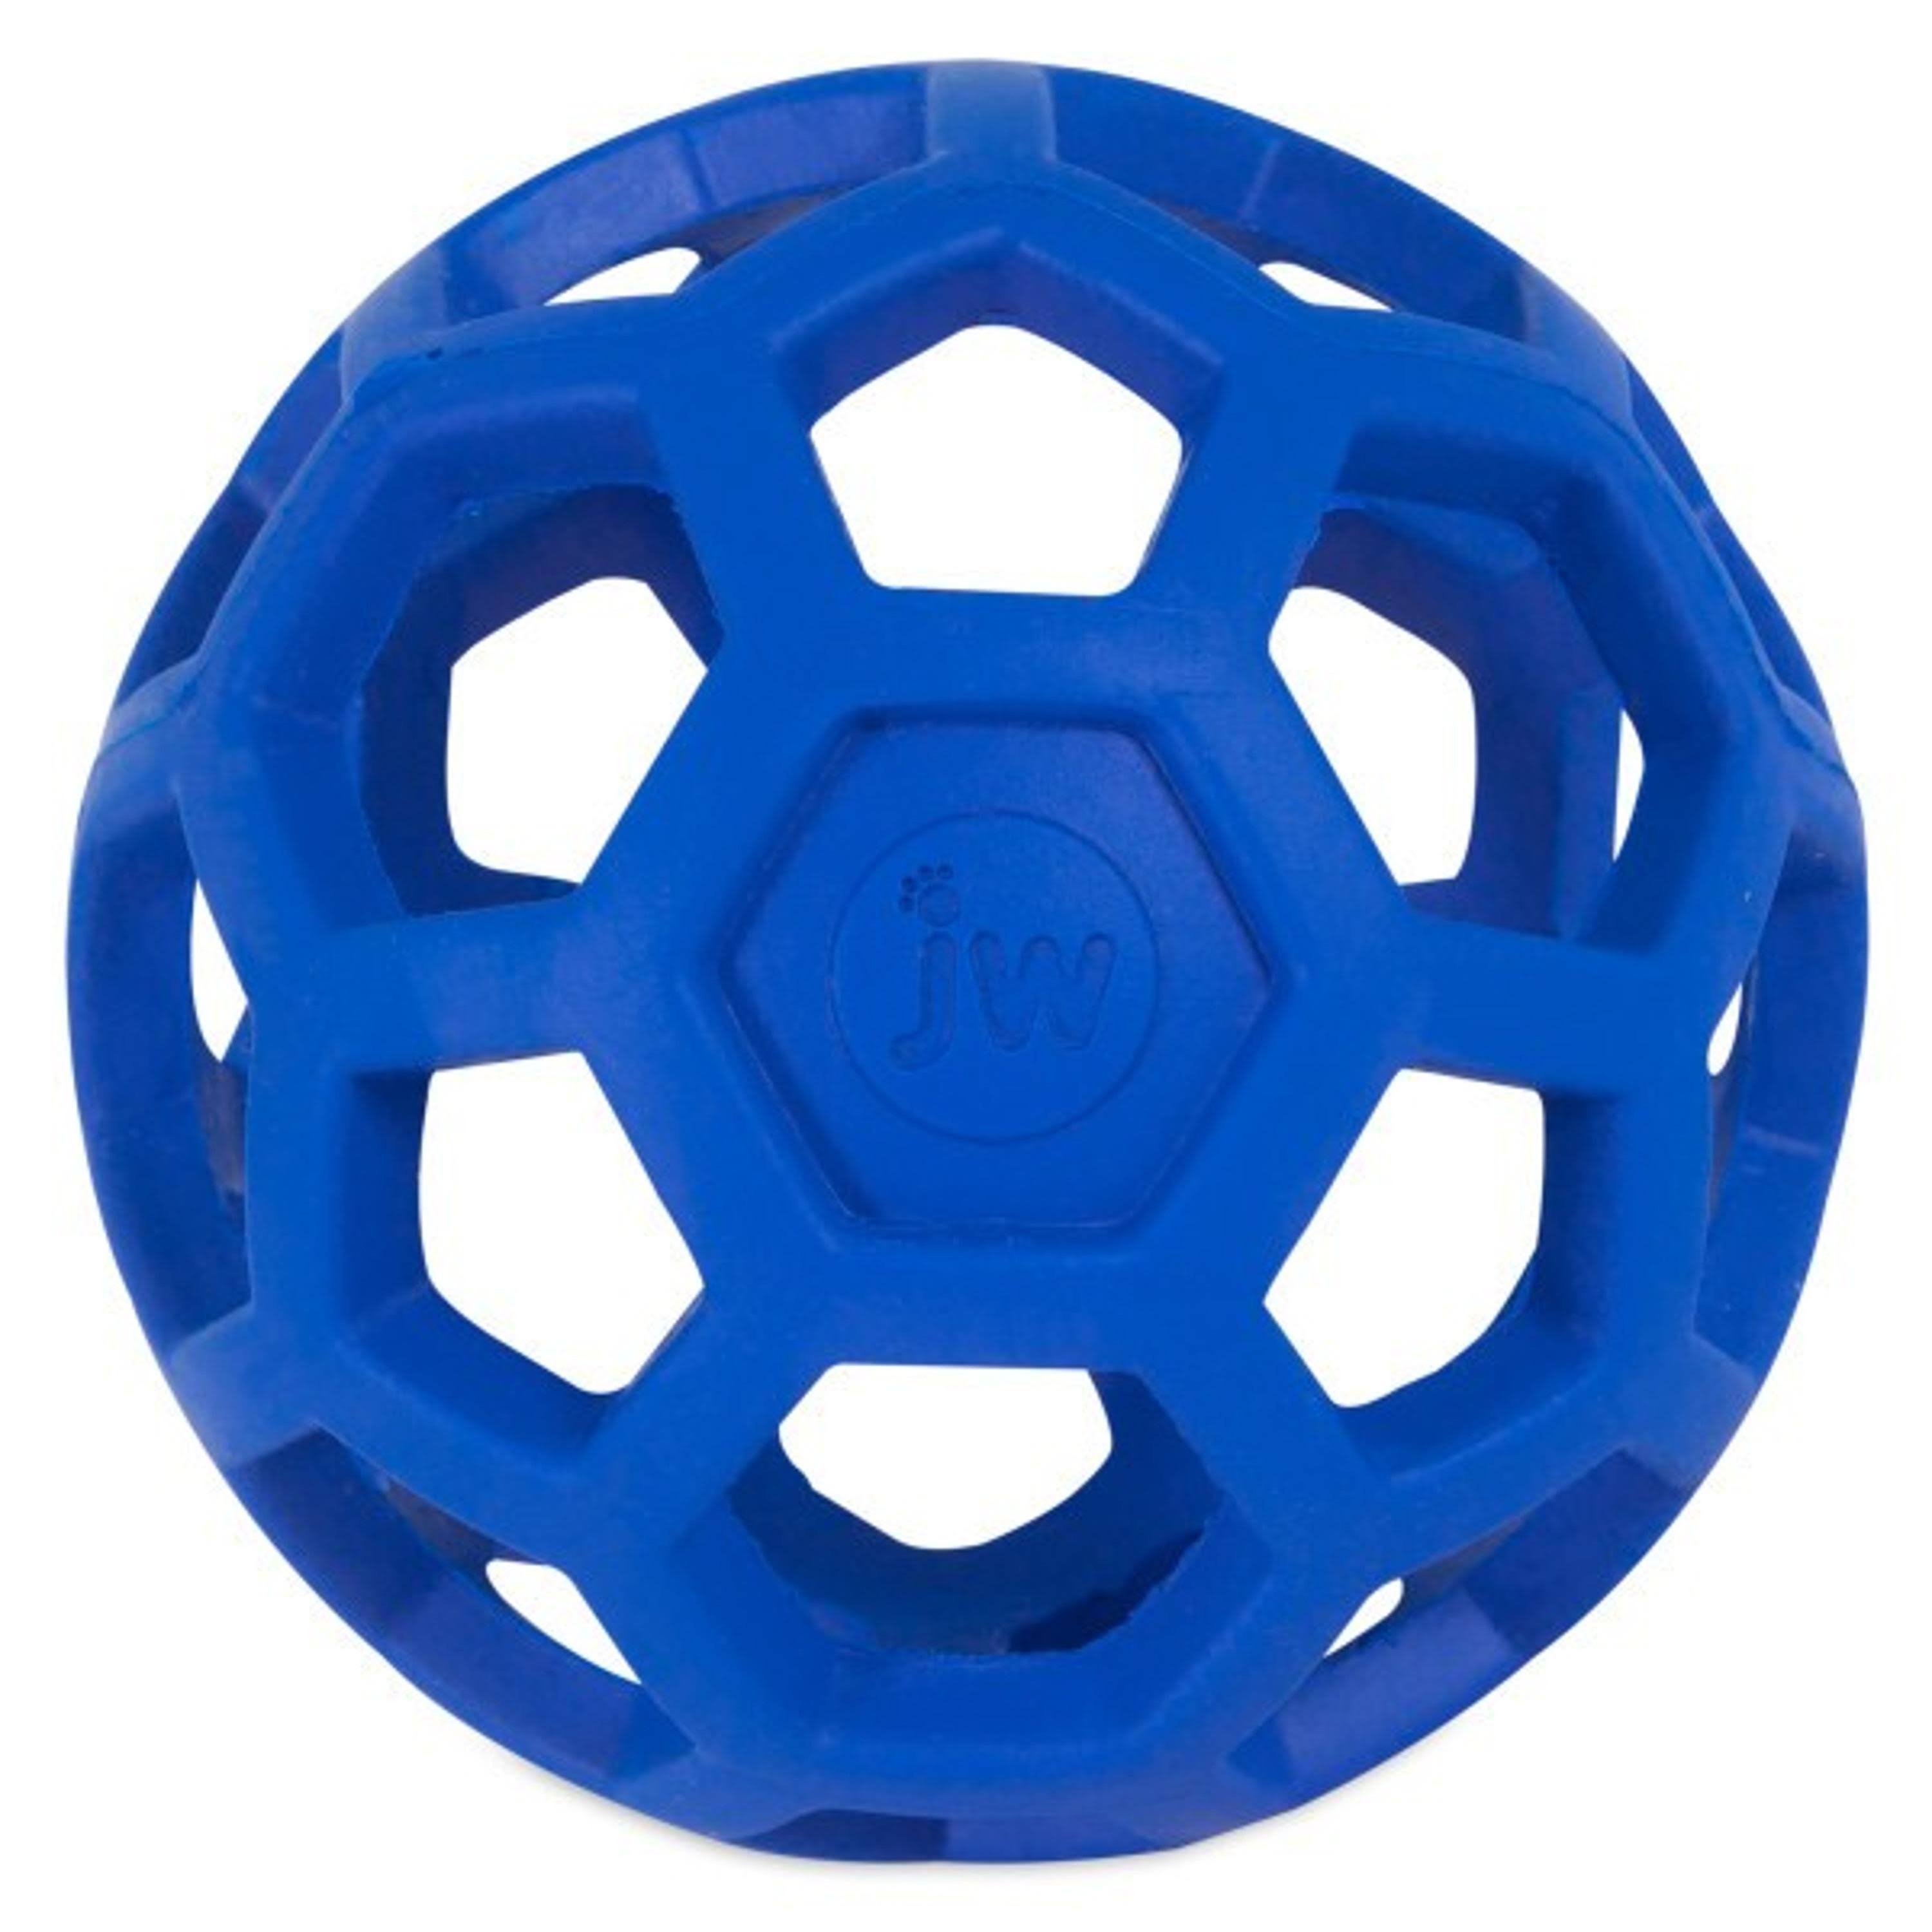 PetMate JW Holee Roller Tough Natural Rubber Durable Dog Tug Treat Ball